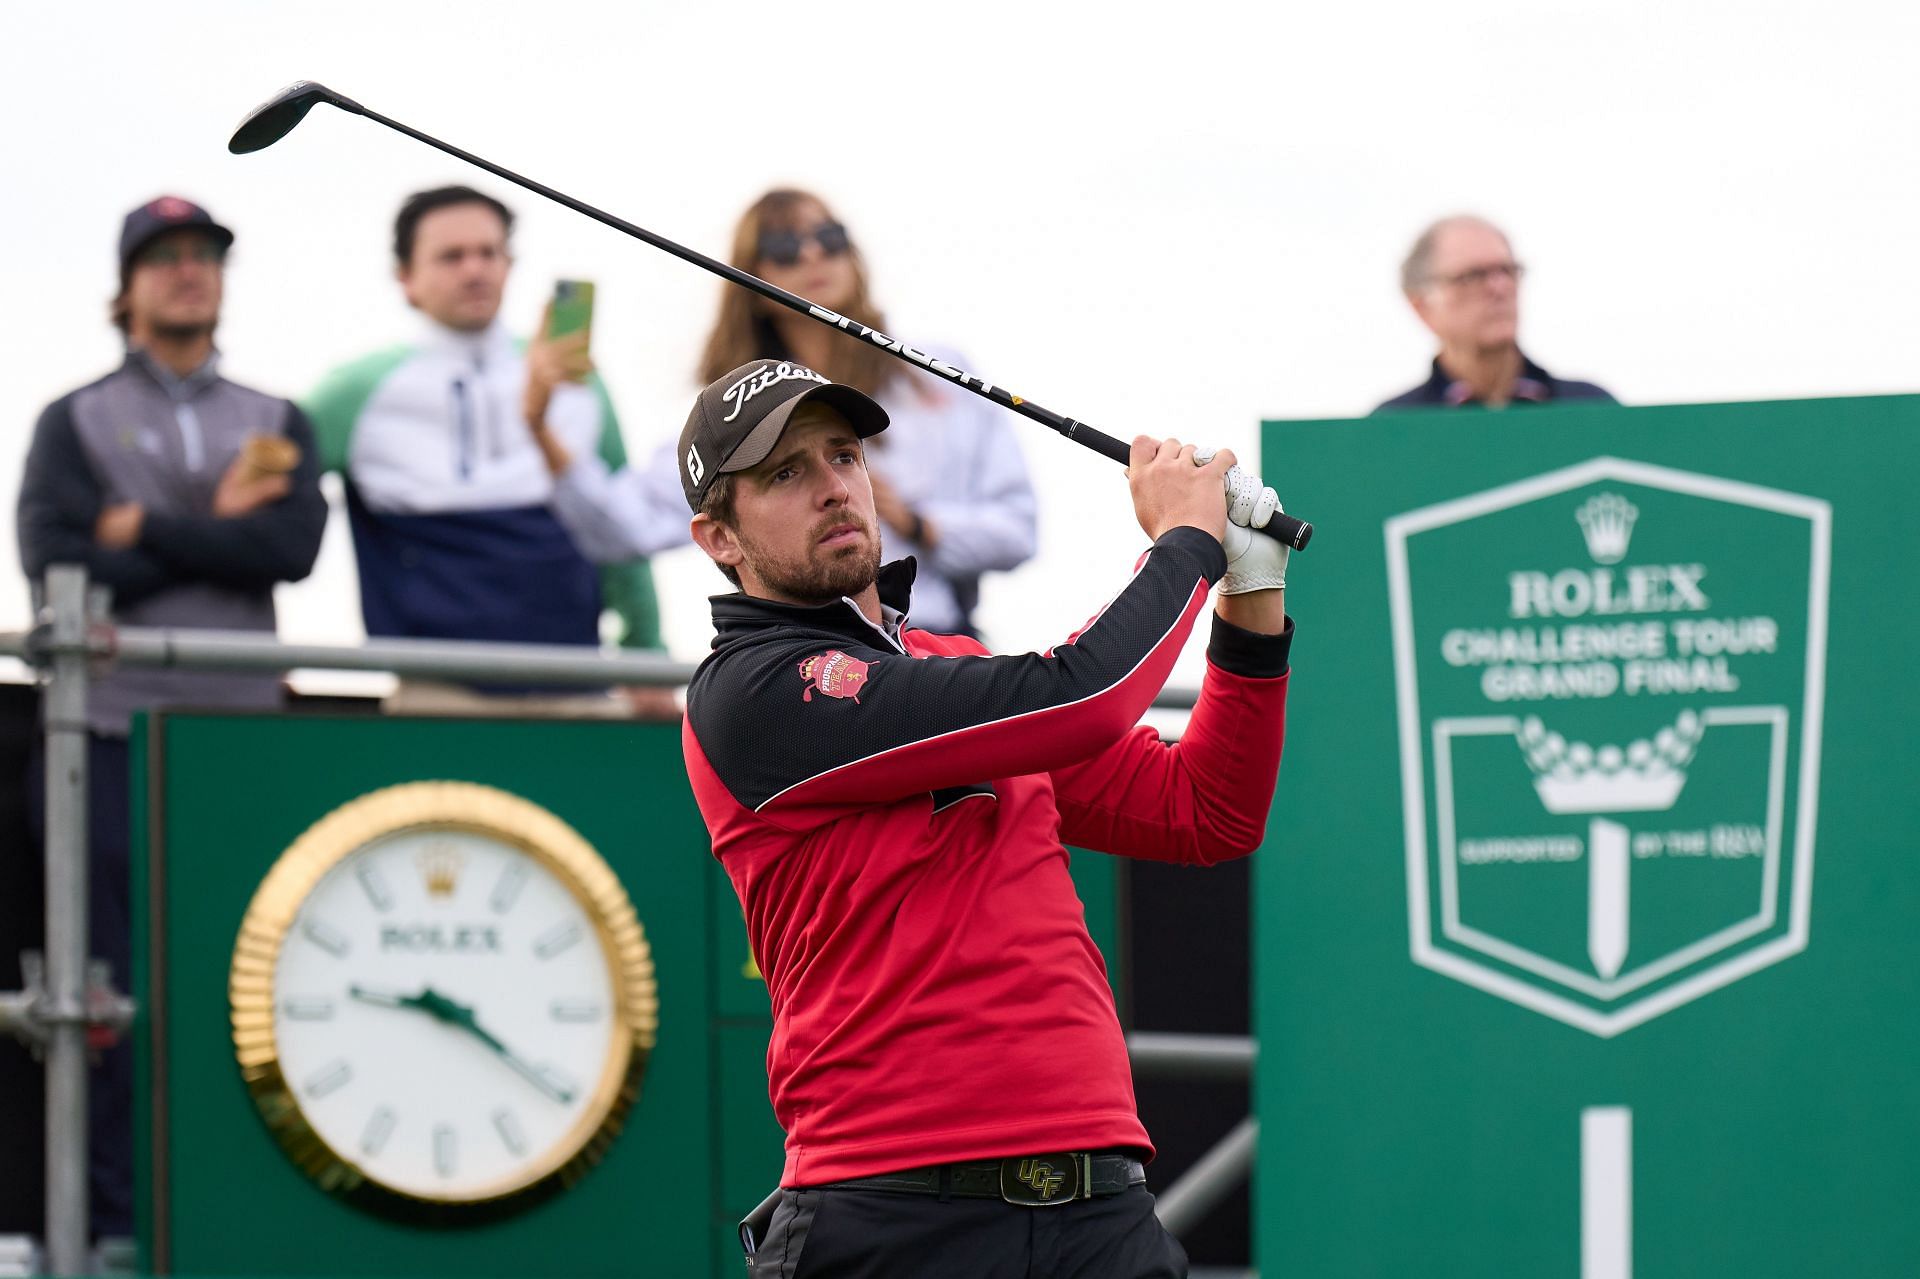 Rolex Challenge Tour Grand Final supported by the R&amp;A 2023 - Day One